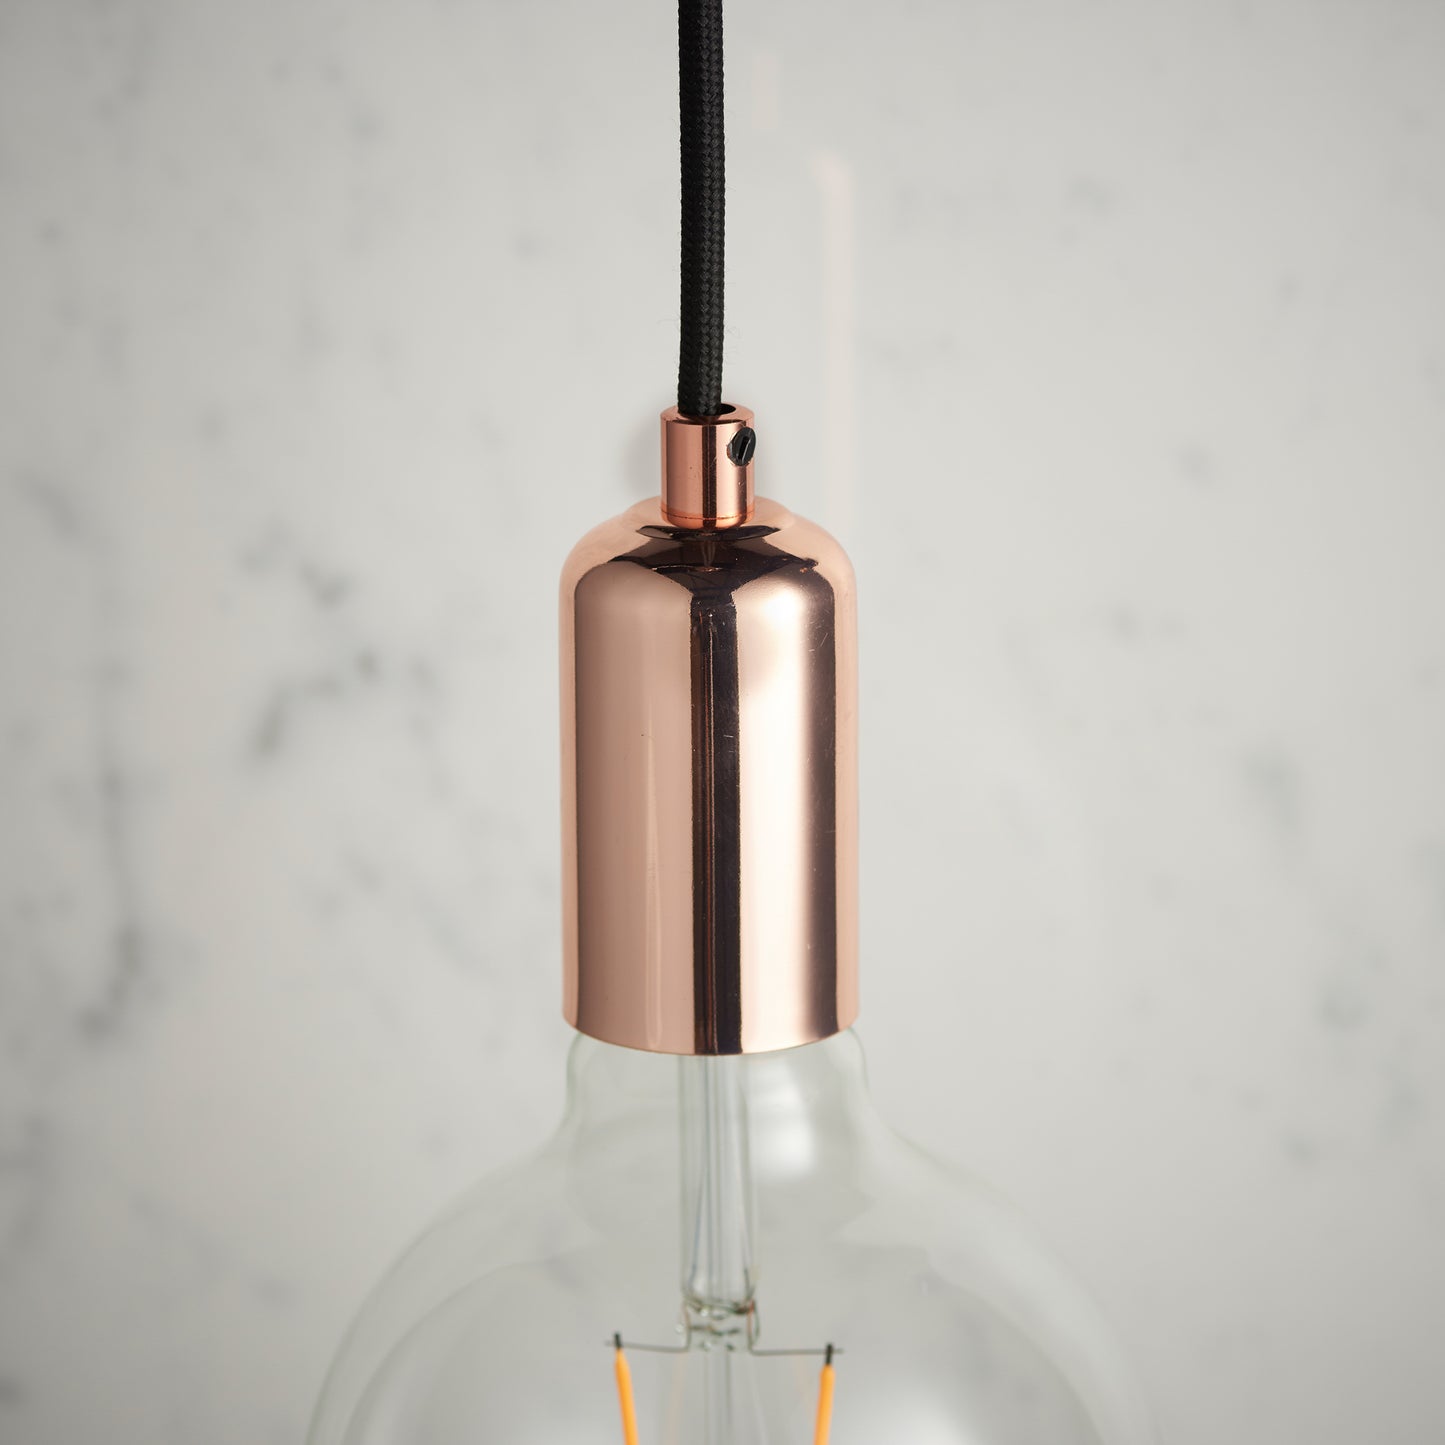 A Copper Pendant Light hanging on a marble countertop from Kikiathome.co.uk, perfect for home decor.